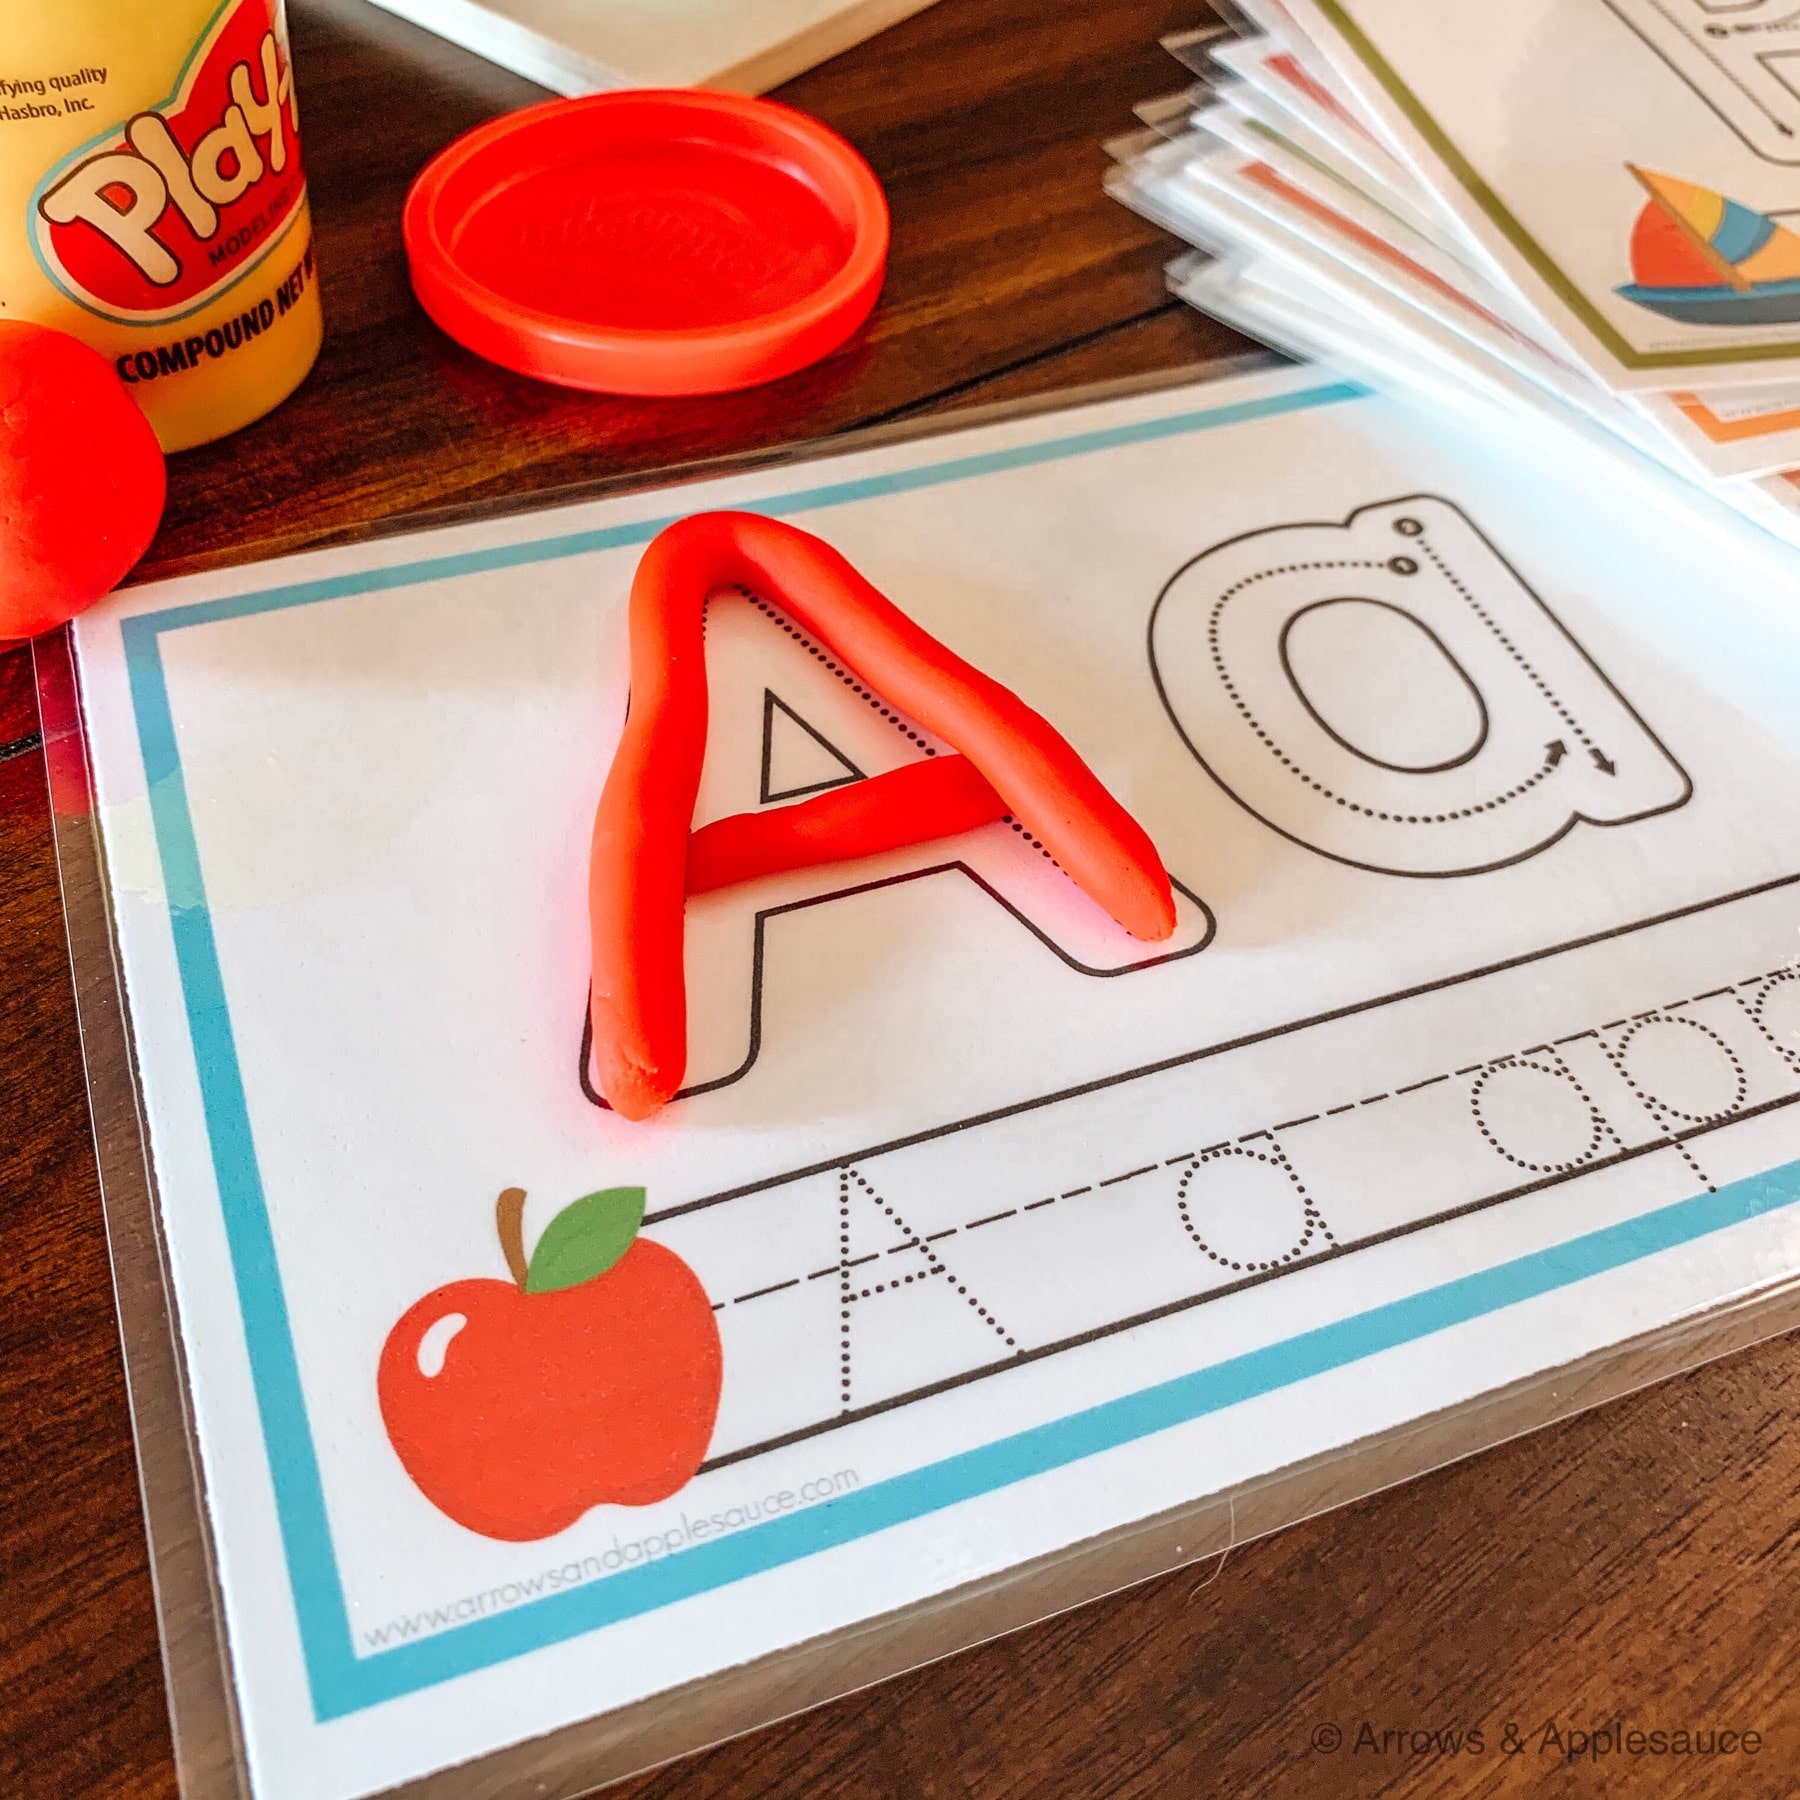 These versatile oversized alphabet and number flashcards are great for so many hands-on learning activities. Perfect for my sensory seeker! #alphabetactivities #alphabetprintables #alphabetflashcards #jumboflashcards #learningtocount #numbers1-20 #numberflashcards #counttotwenty #countingflashcards #preschoolprintables #homeschoolprintables #sensoryseeker #handsonlearning